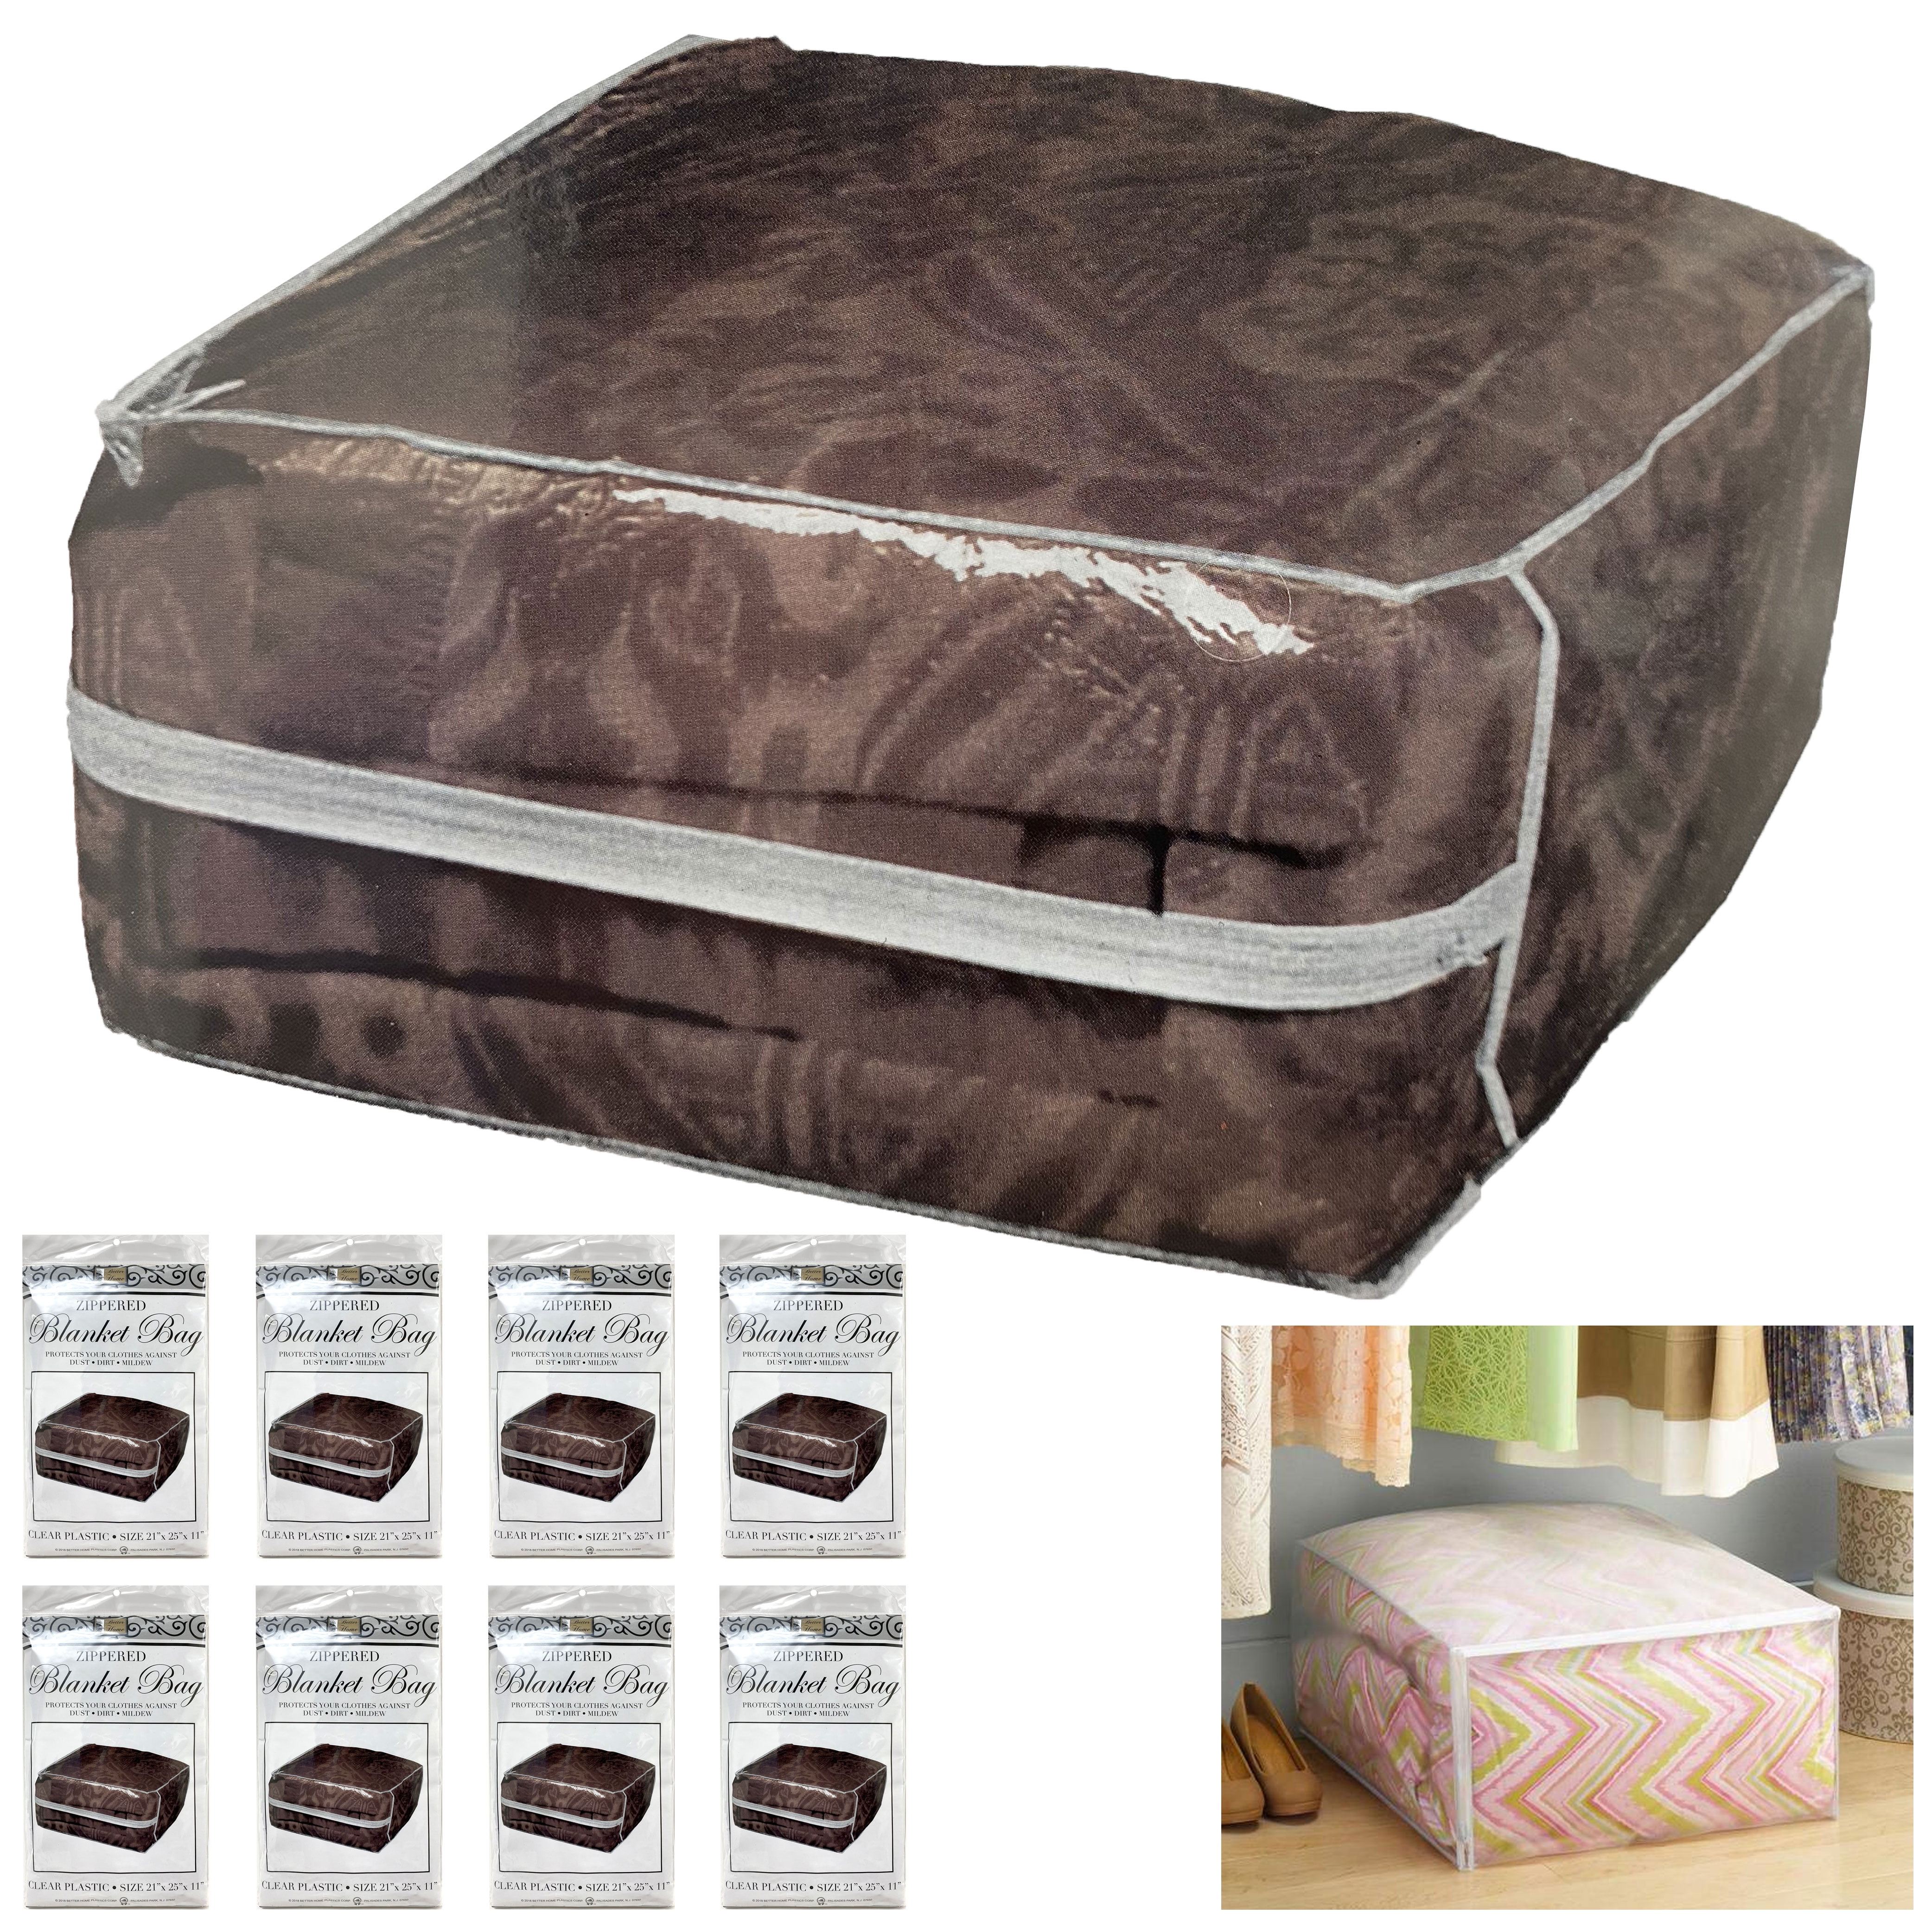 Sdjma Elk Printing Blanket Storage Bags with Sturdy Zipper, Foldable Comforter Storage Bag, Large Organizers for Blankets, Pillow, Quilts, Linen